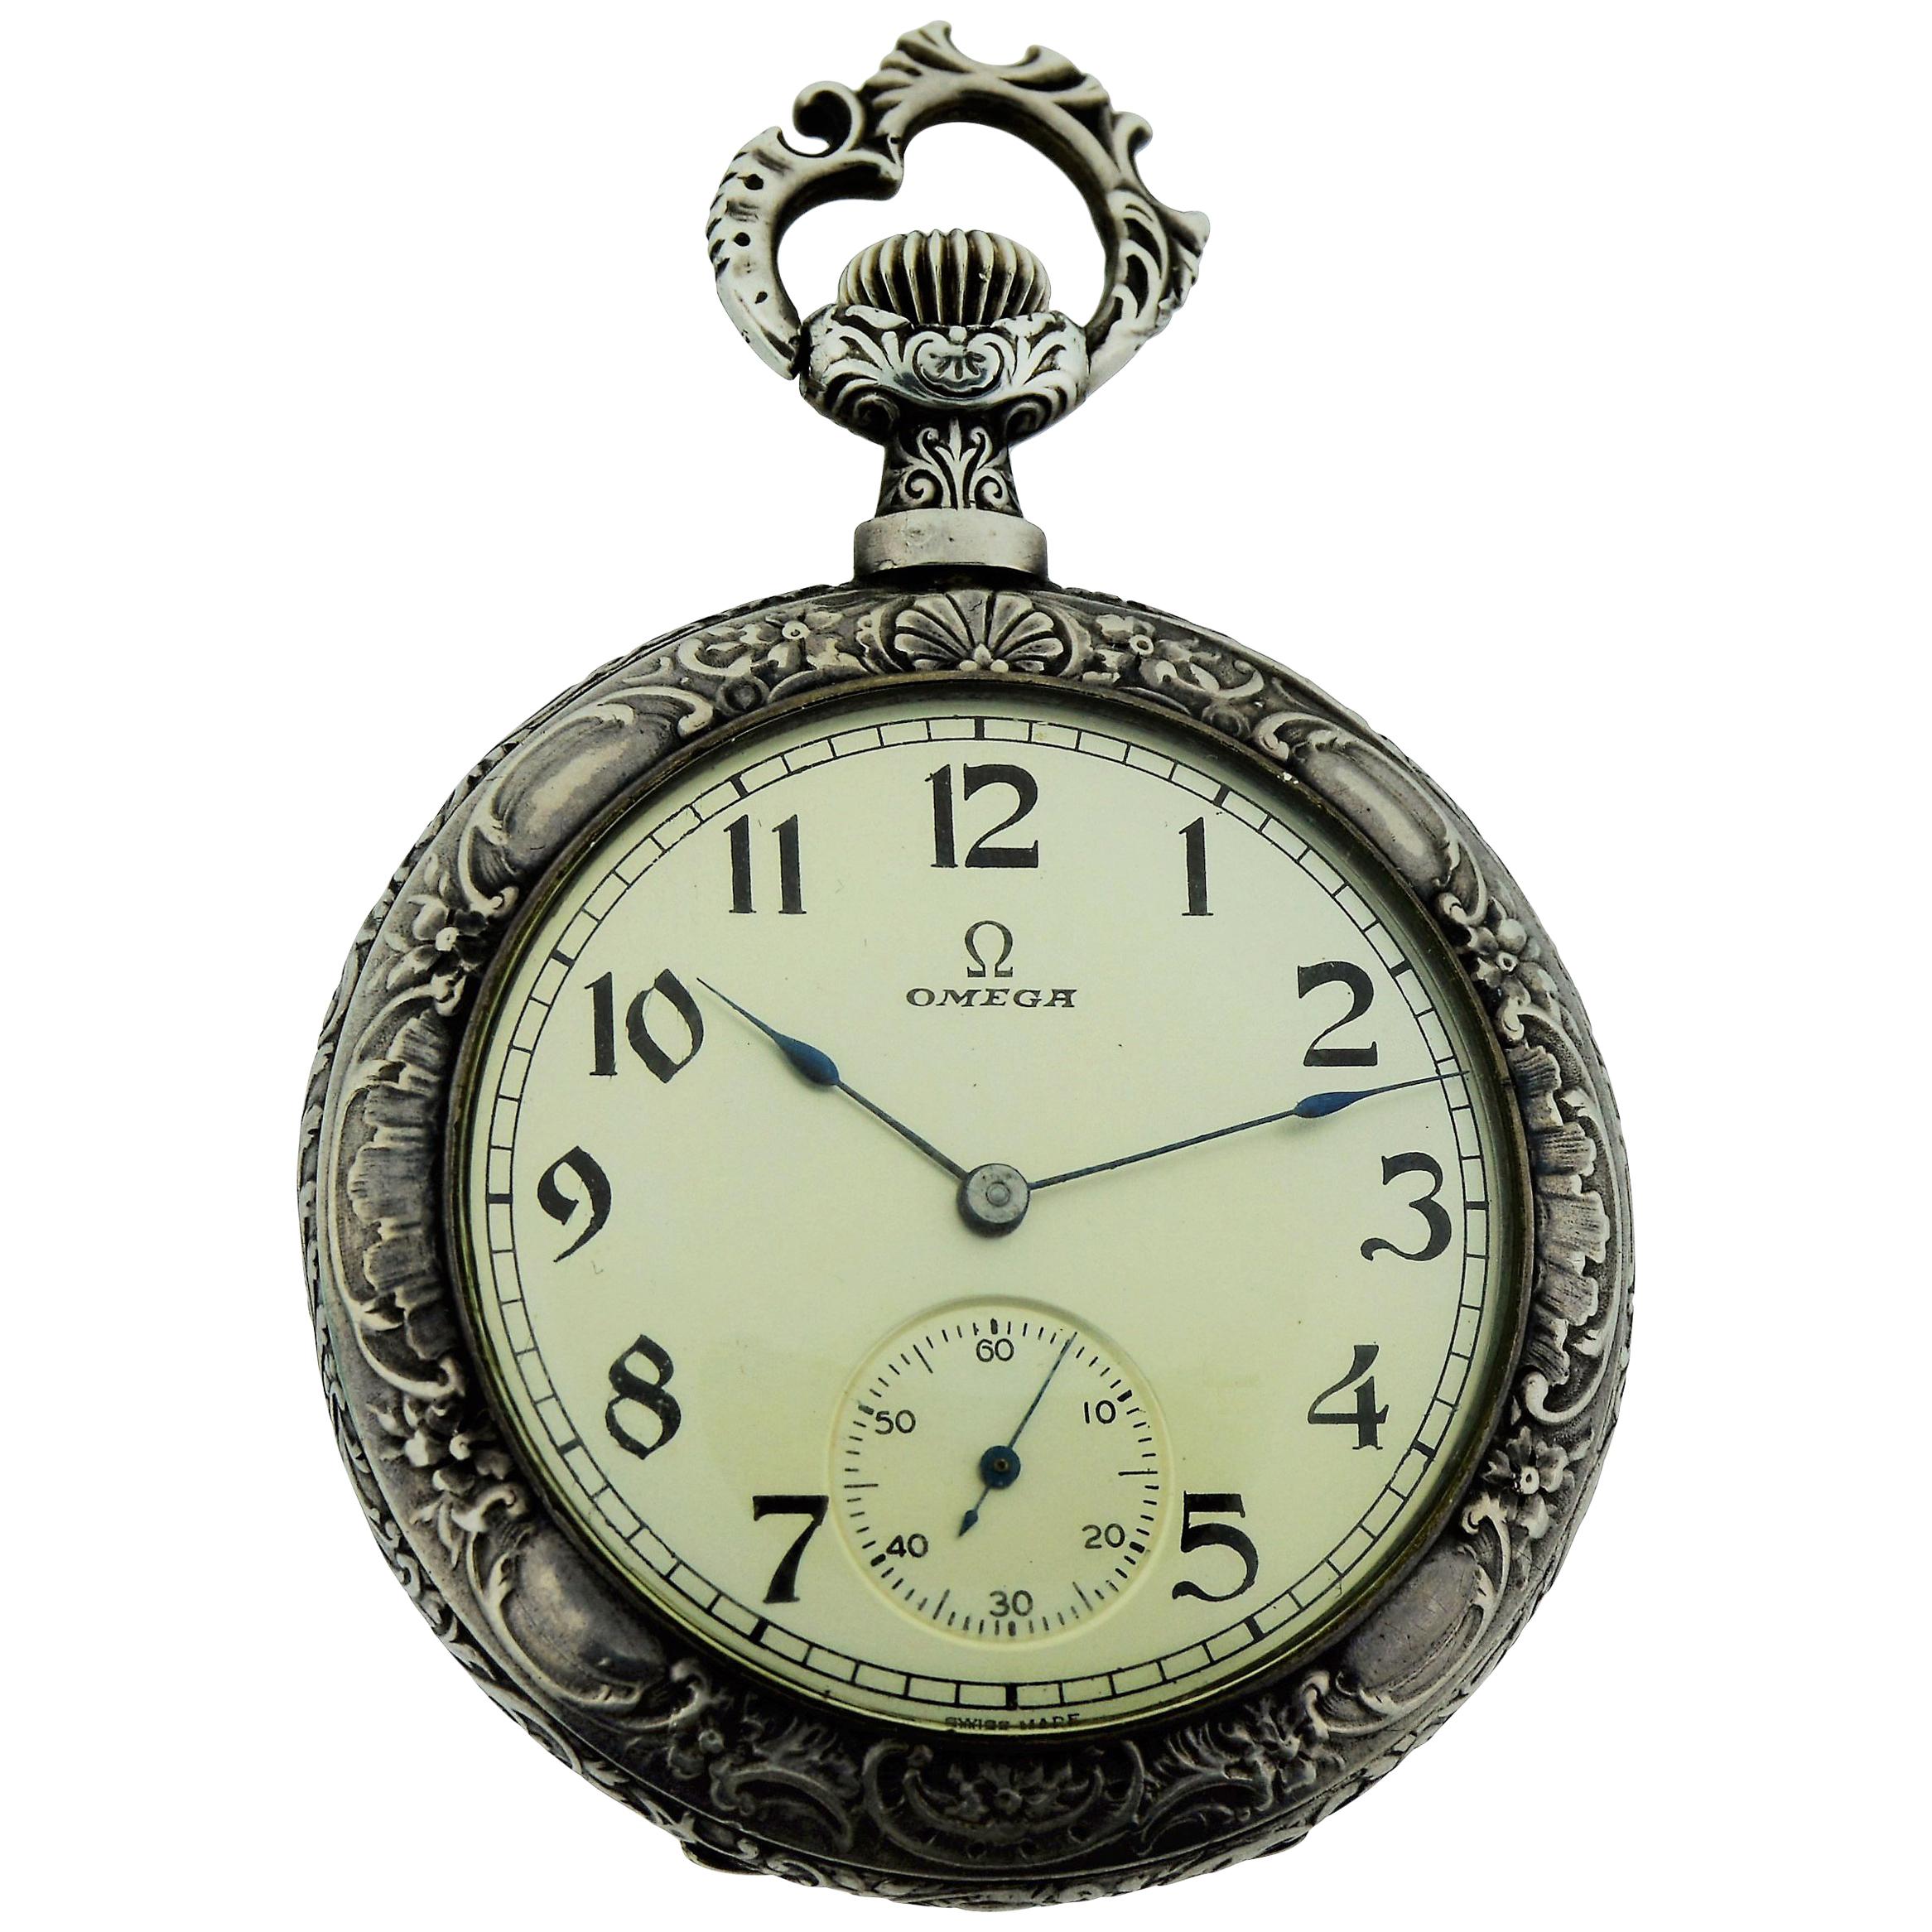 Omega Silver Pocket Watch circa 1894, First Year of Omega with Art Nouveau Motif